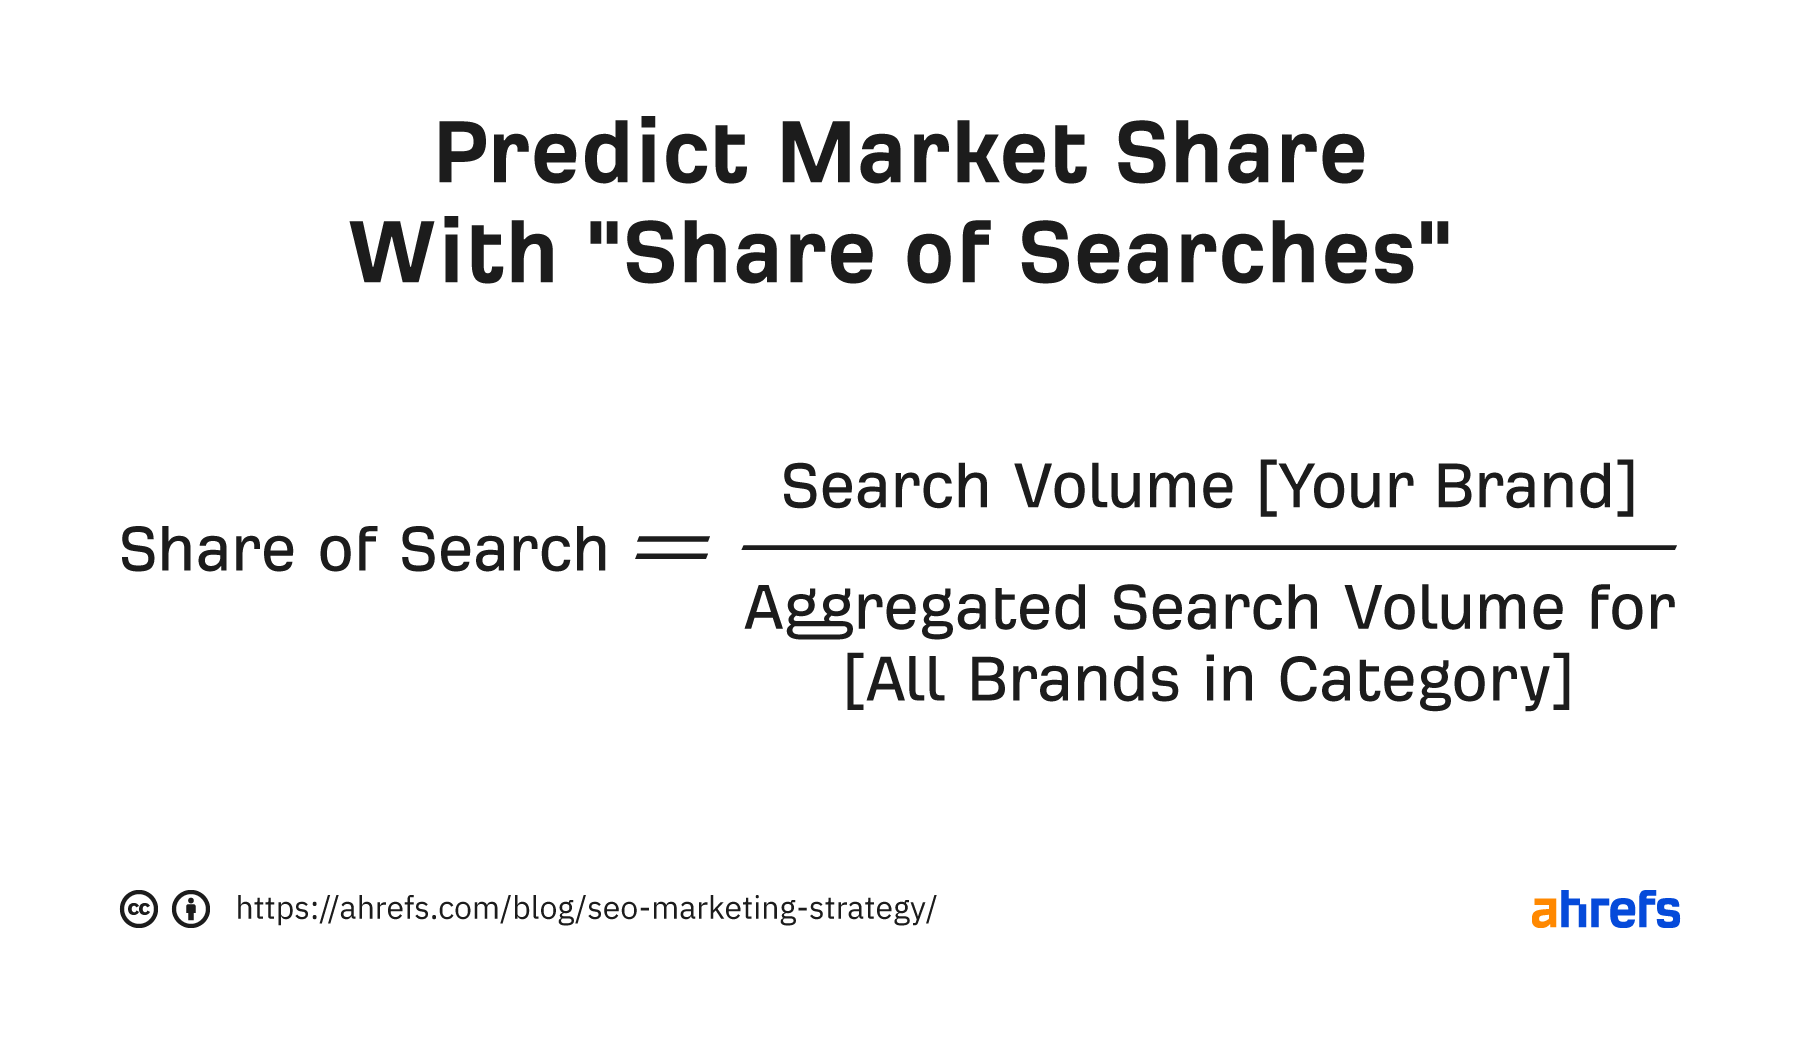 Equation of Les Binet 's "share of search"